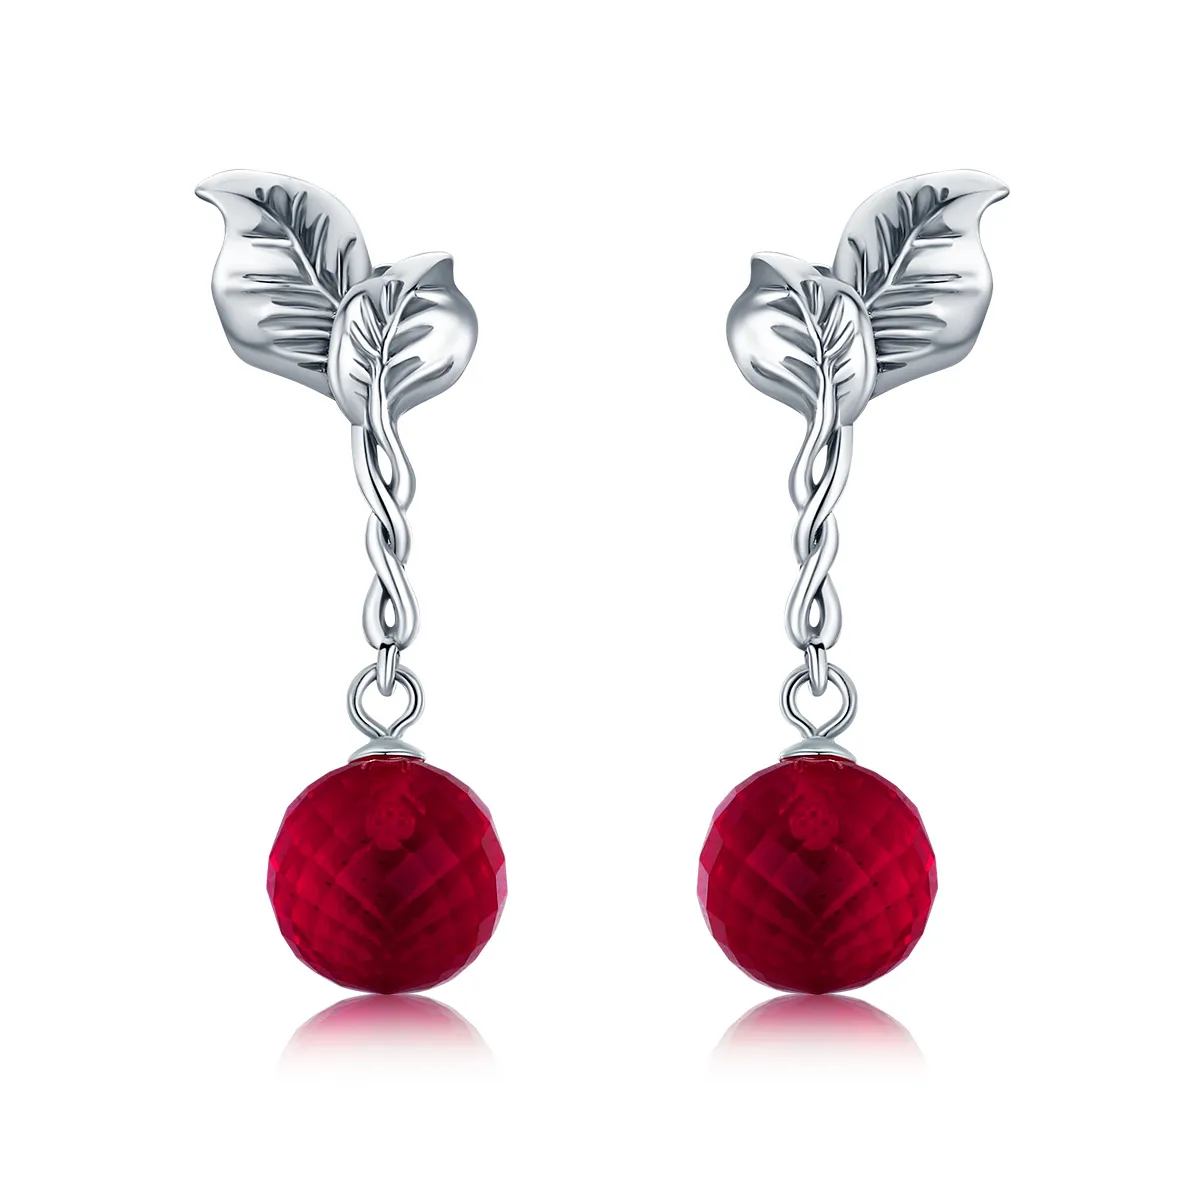 Pandora Style Silver Fruit of Passion Hanging Earrings - SCE356